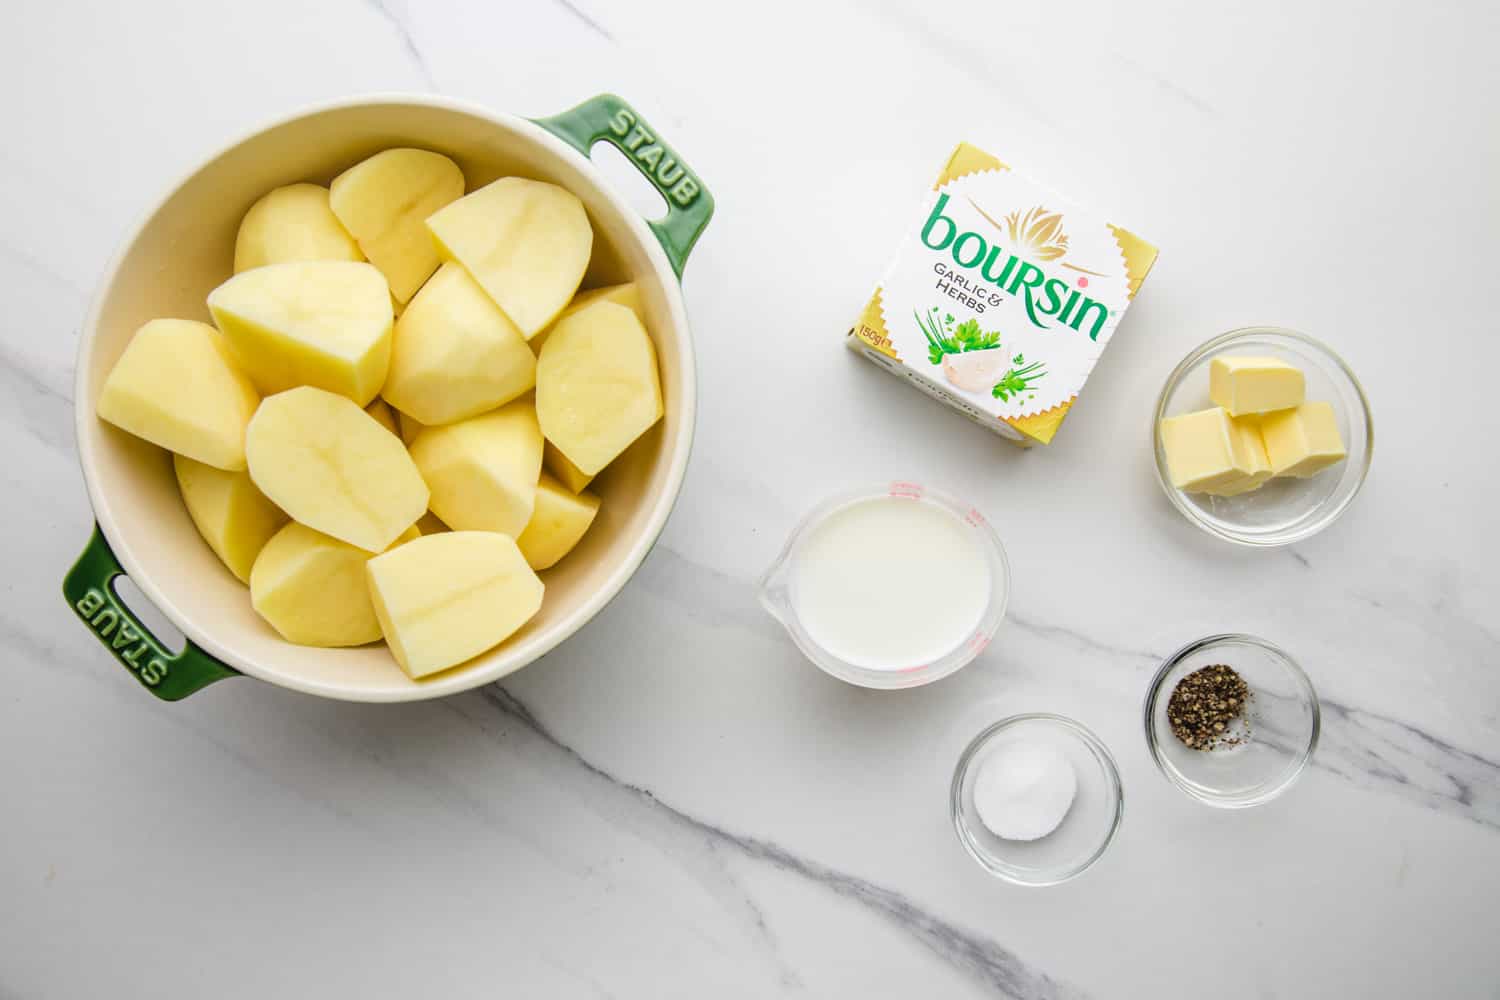 Ingredients needed to make boursin mashed potatoes including potatoes, boursin cheese, milk, butter, salt and pepper.